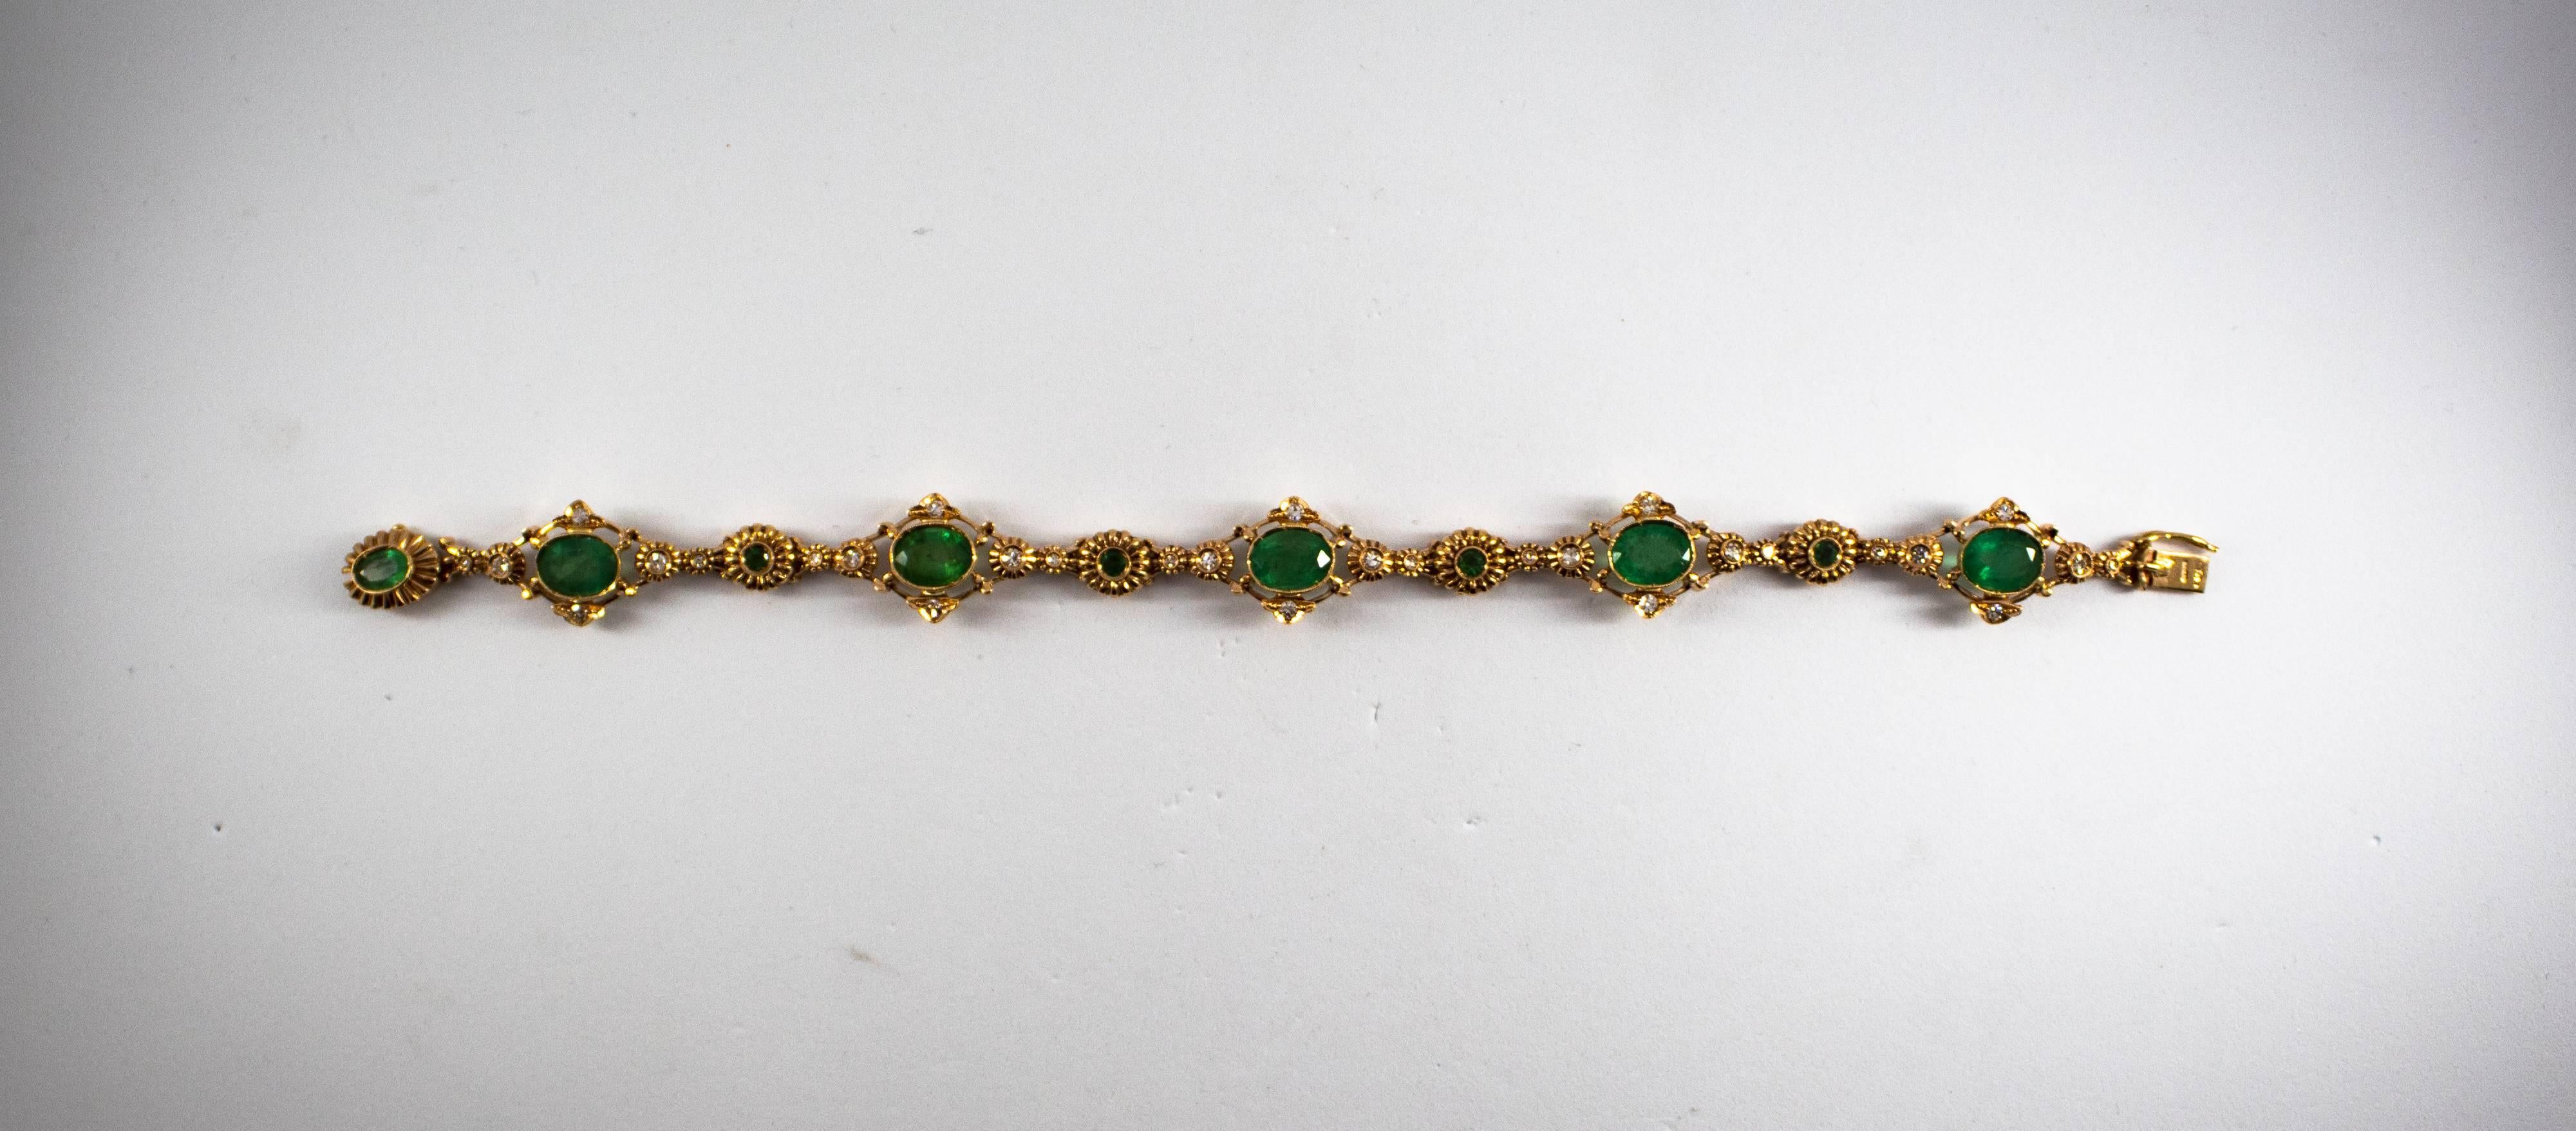 This bracelet is made of 14K Yellow Gold.
This bracelet has 0.50 Carats of White Diamonds.
This bracelet has 5.70 Carats of Zambia Natural Emeralds.
We're a workshop so every piece is handmade, customizable and resizable.